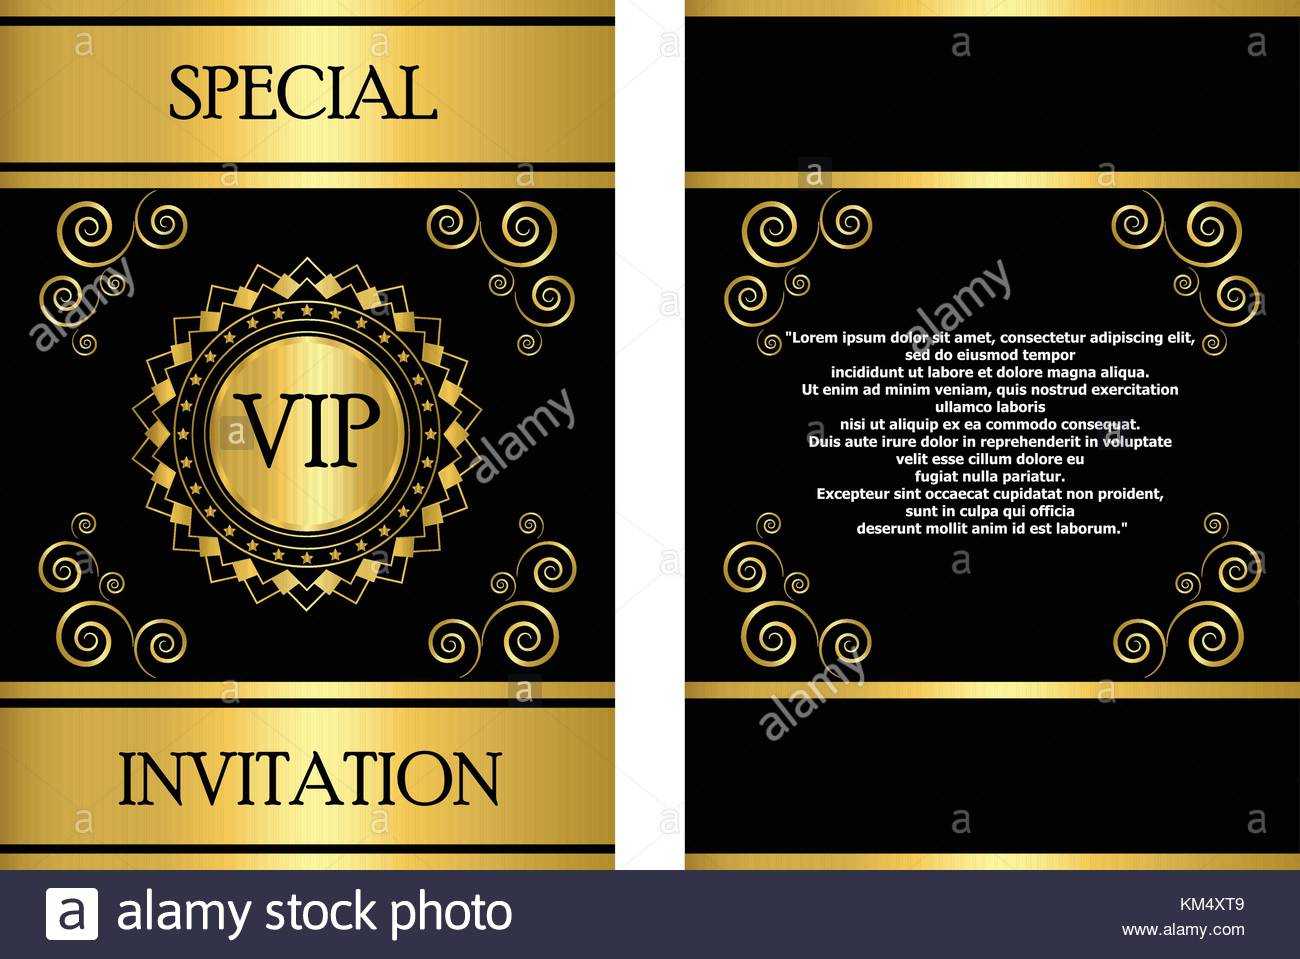 A Golden Vip Invitation Card Template That Can Be Used For Pertaining To Event Invitation Card Template